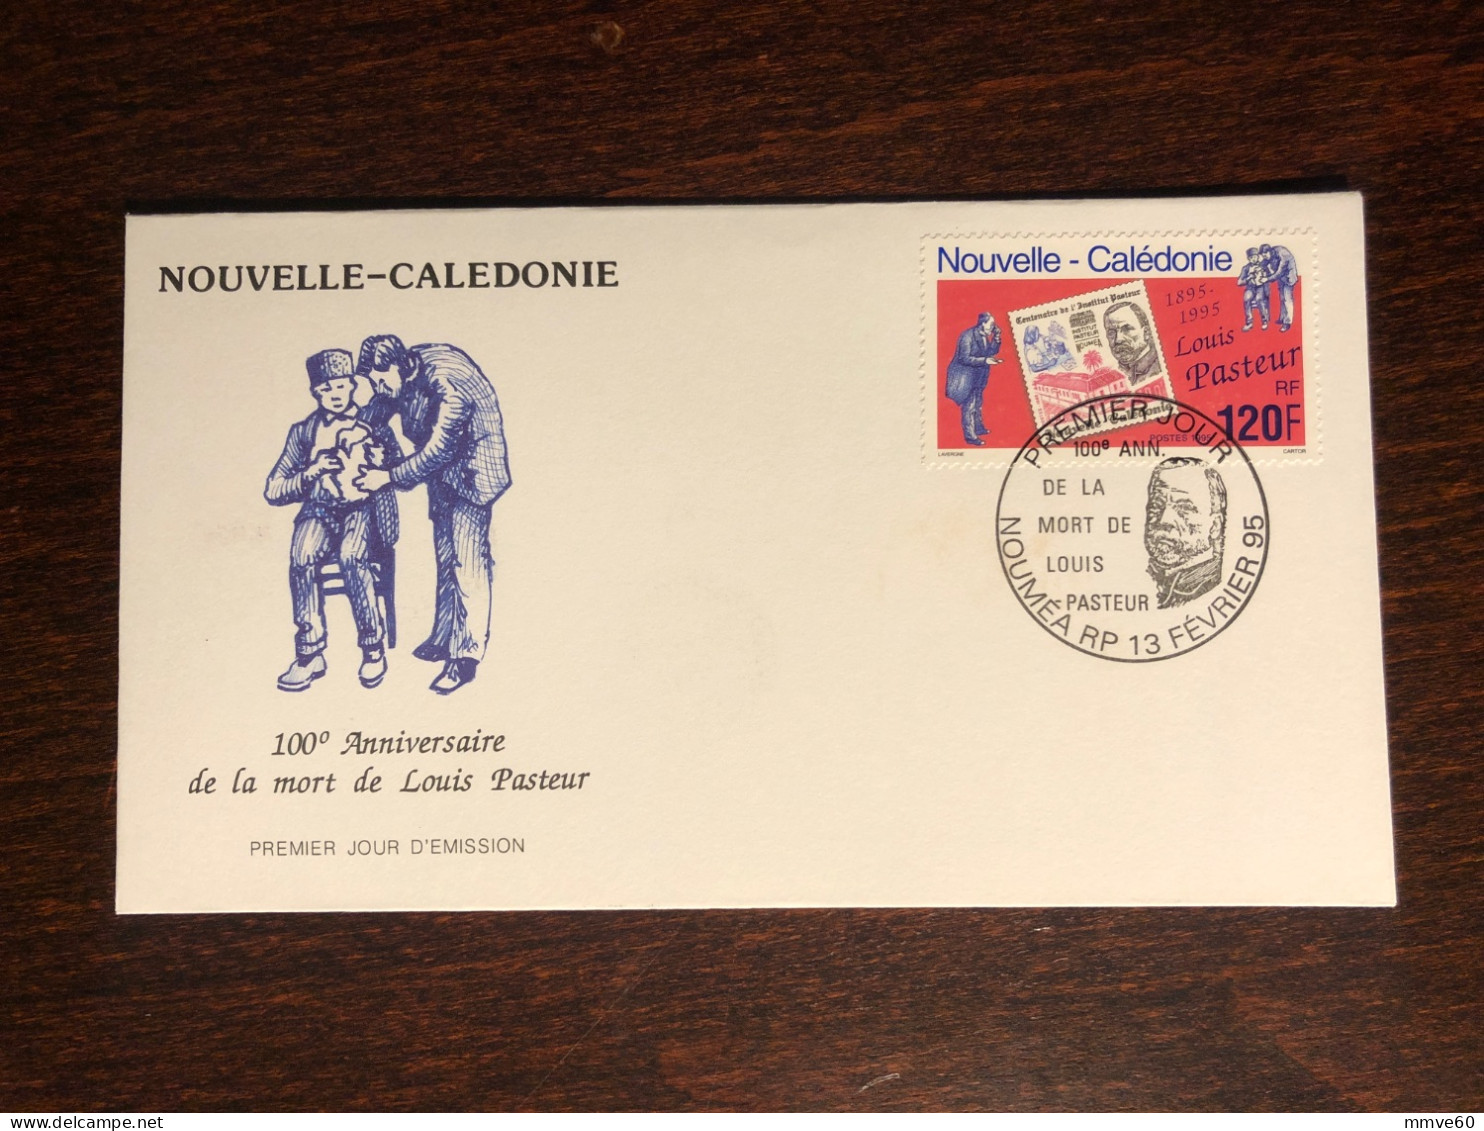 NEW CALEDONIA NOUVELLE CALEDONIE FDC COVER 1995 YEAR PASTEUR HEALTH MEDICINE - Briefe U. Dokumente